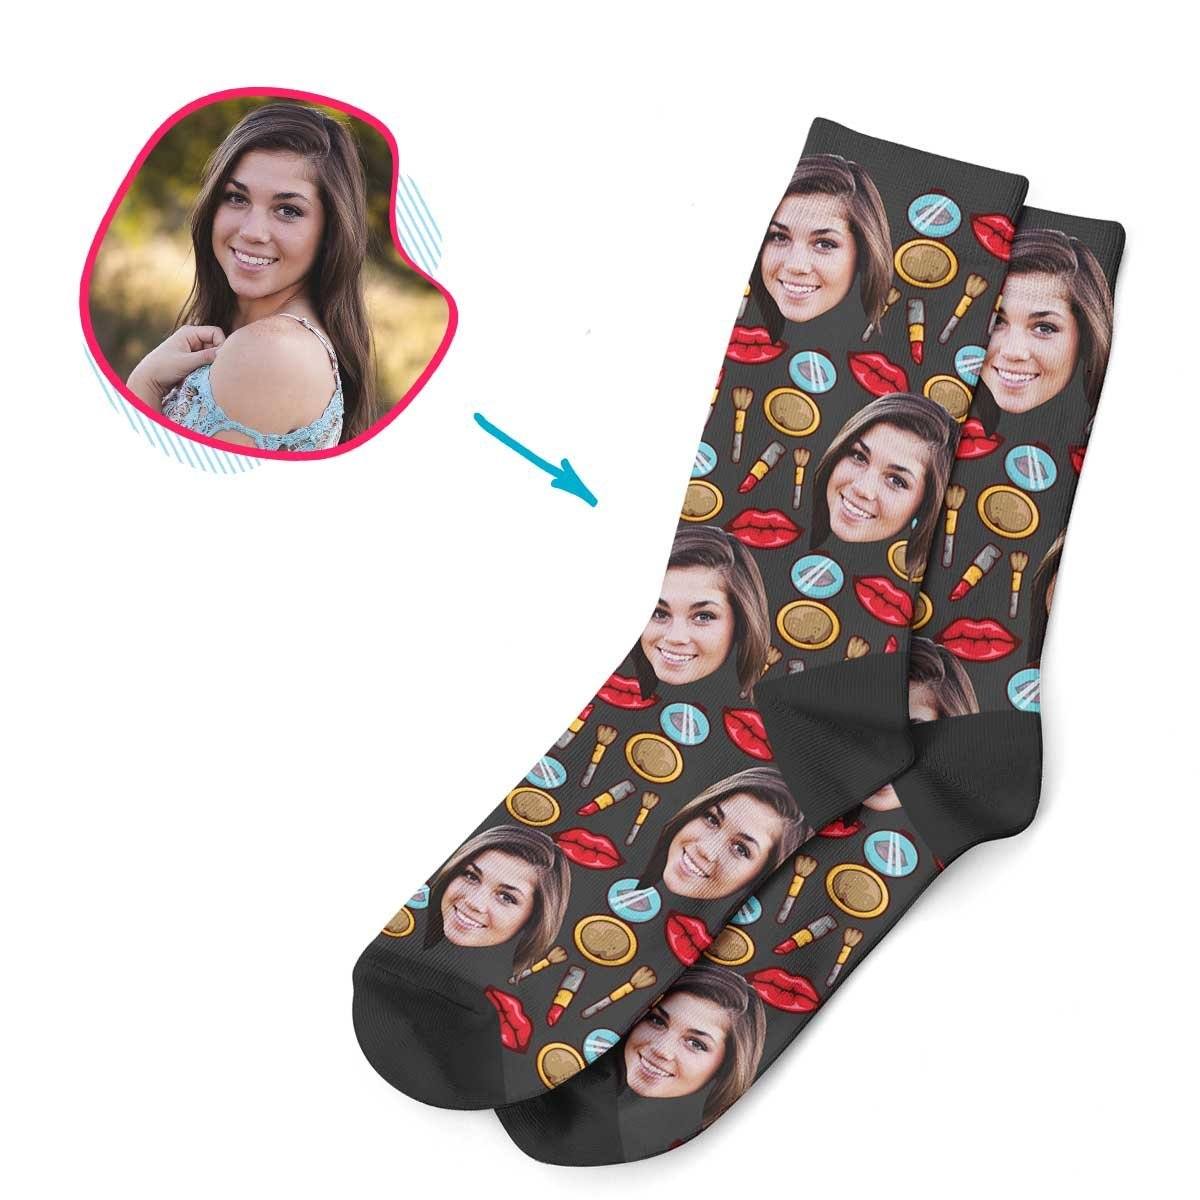 Dark Makeup personalized socks with photo of face printed on them